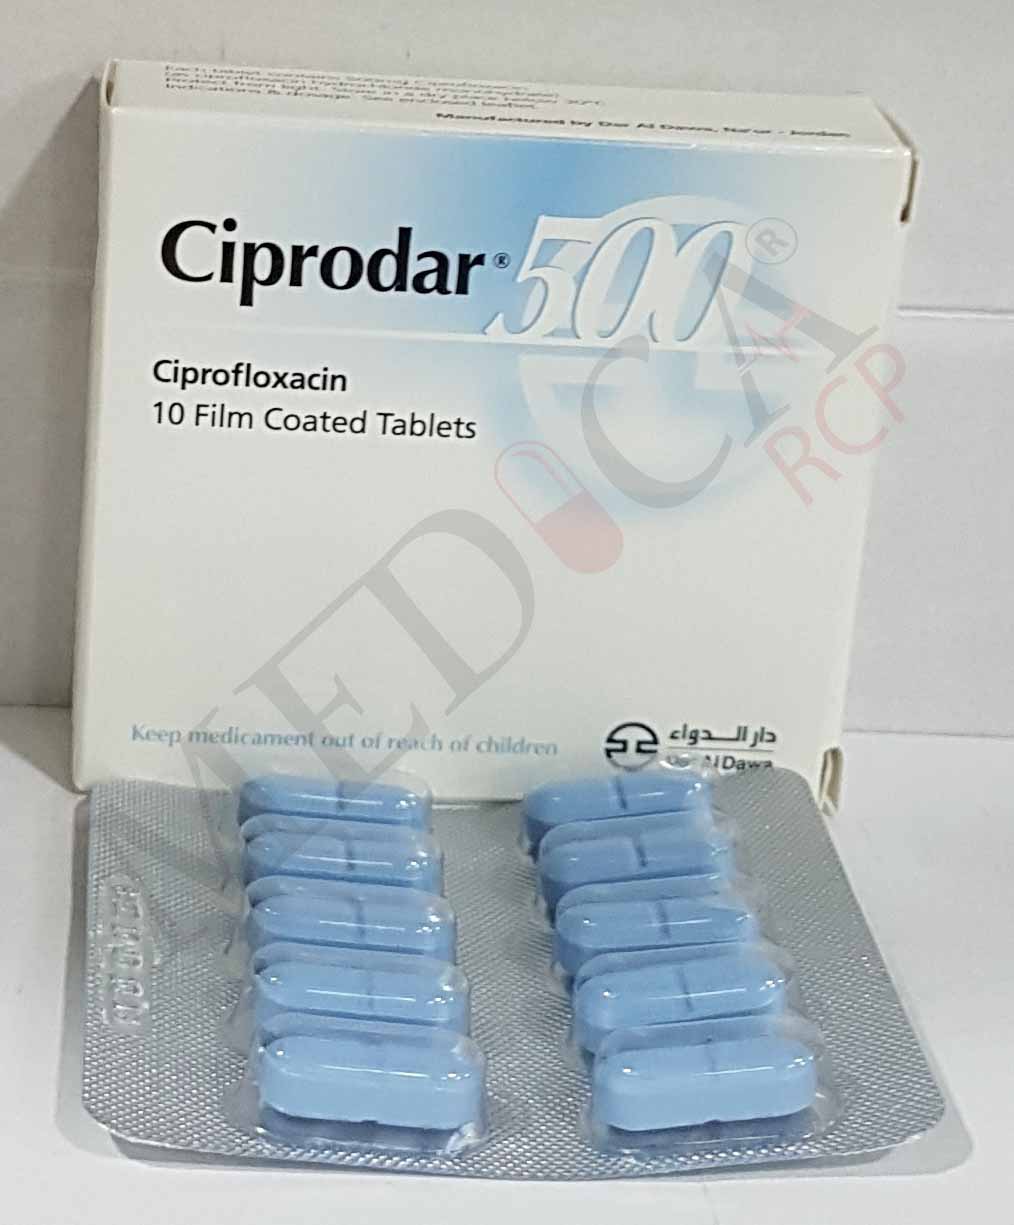 Medica Rcp Ciprodar 500mg Indications Side Effects Composition Route All Price Alternative Products